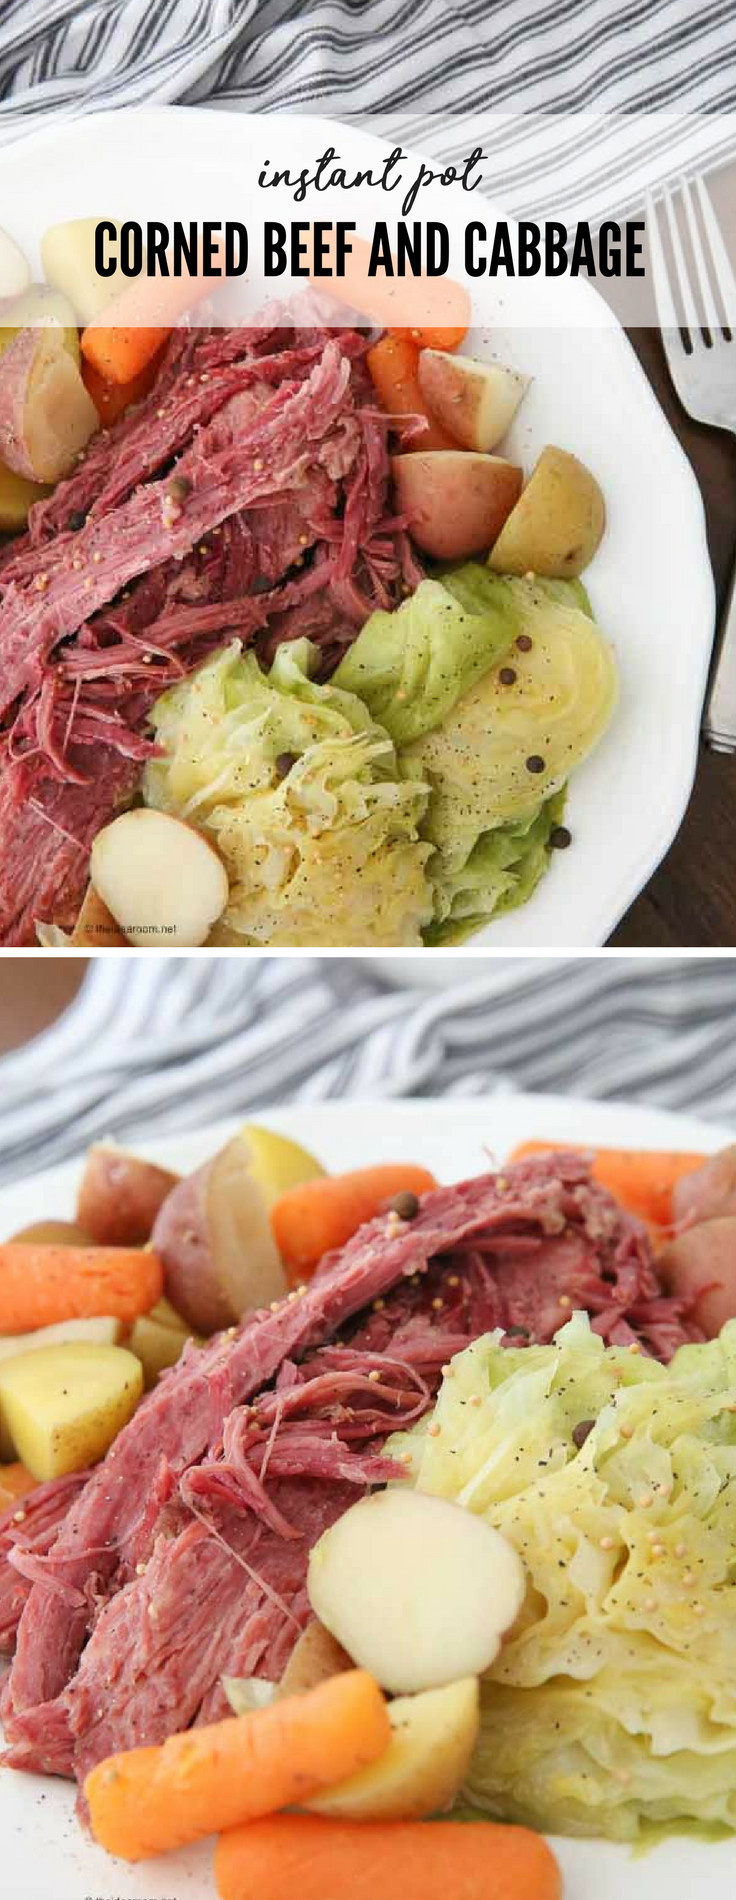 Best Corned Beef And Cabbage
 Instant Pot Corned Beef and Cabbage Recipe